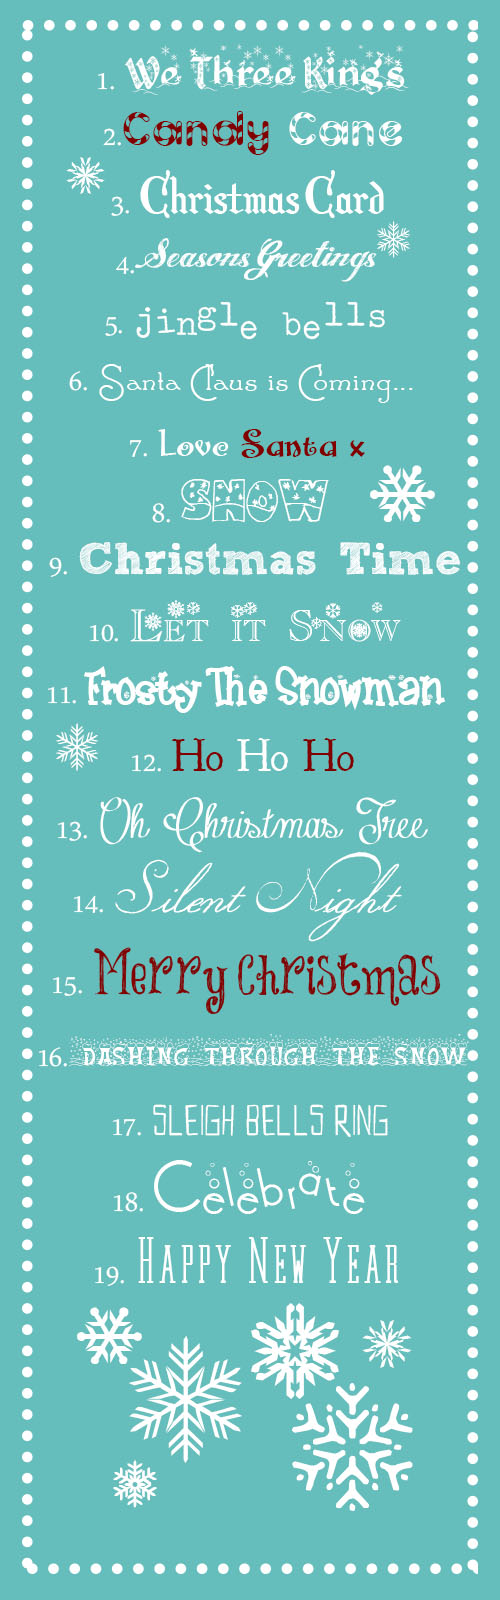 Best Christmas Fonts Free